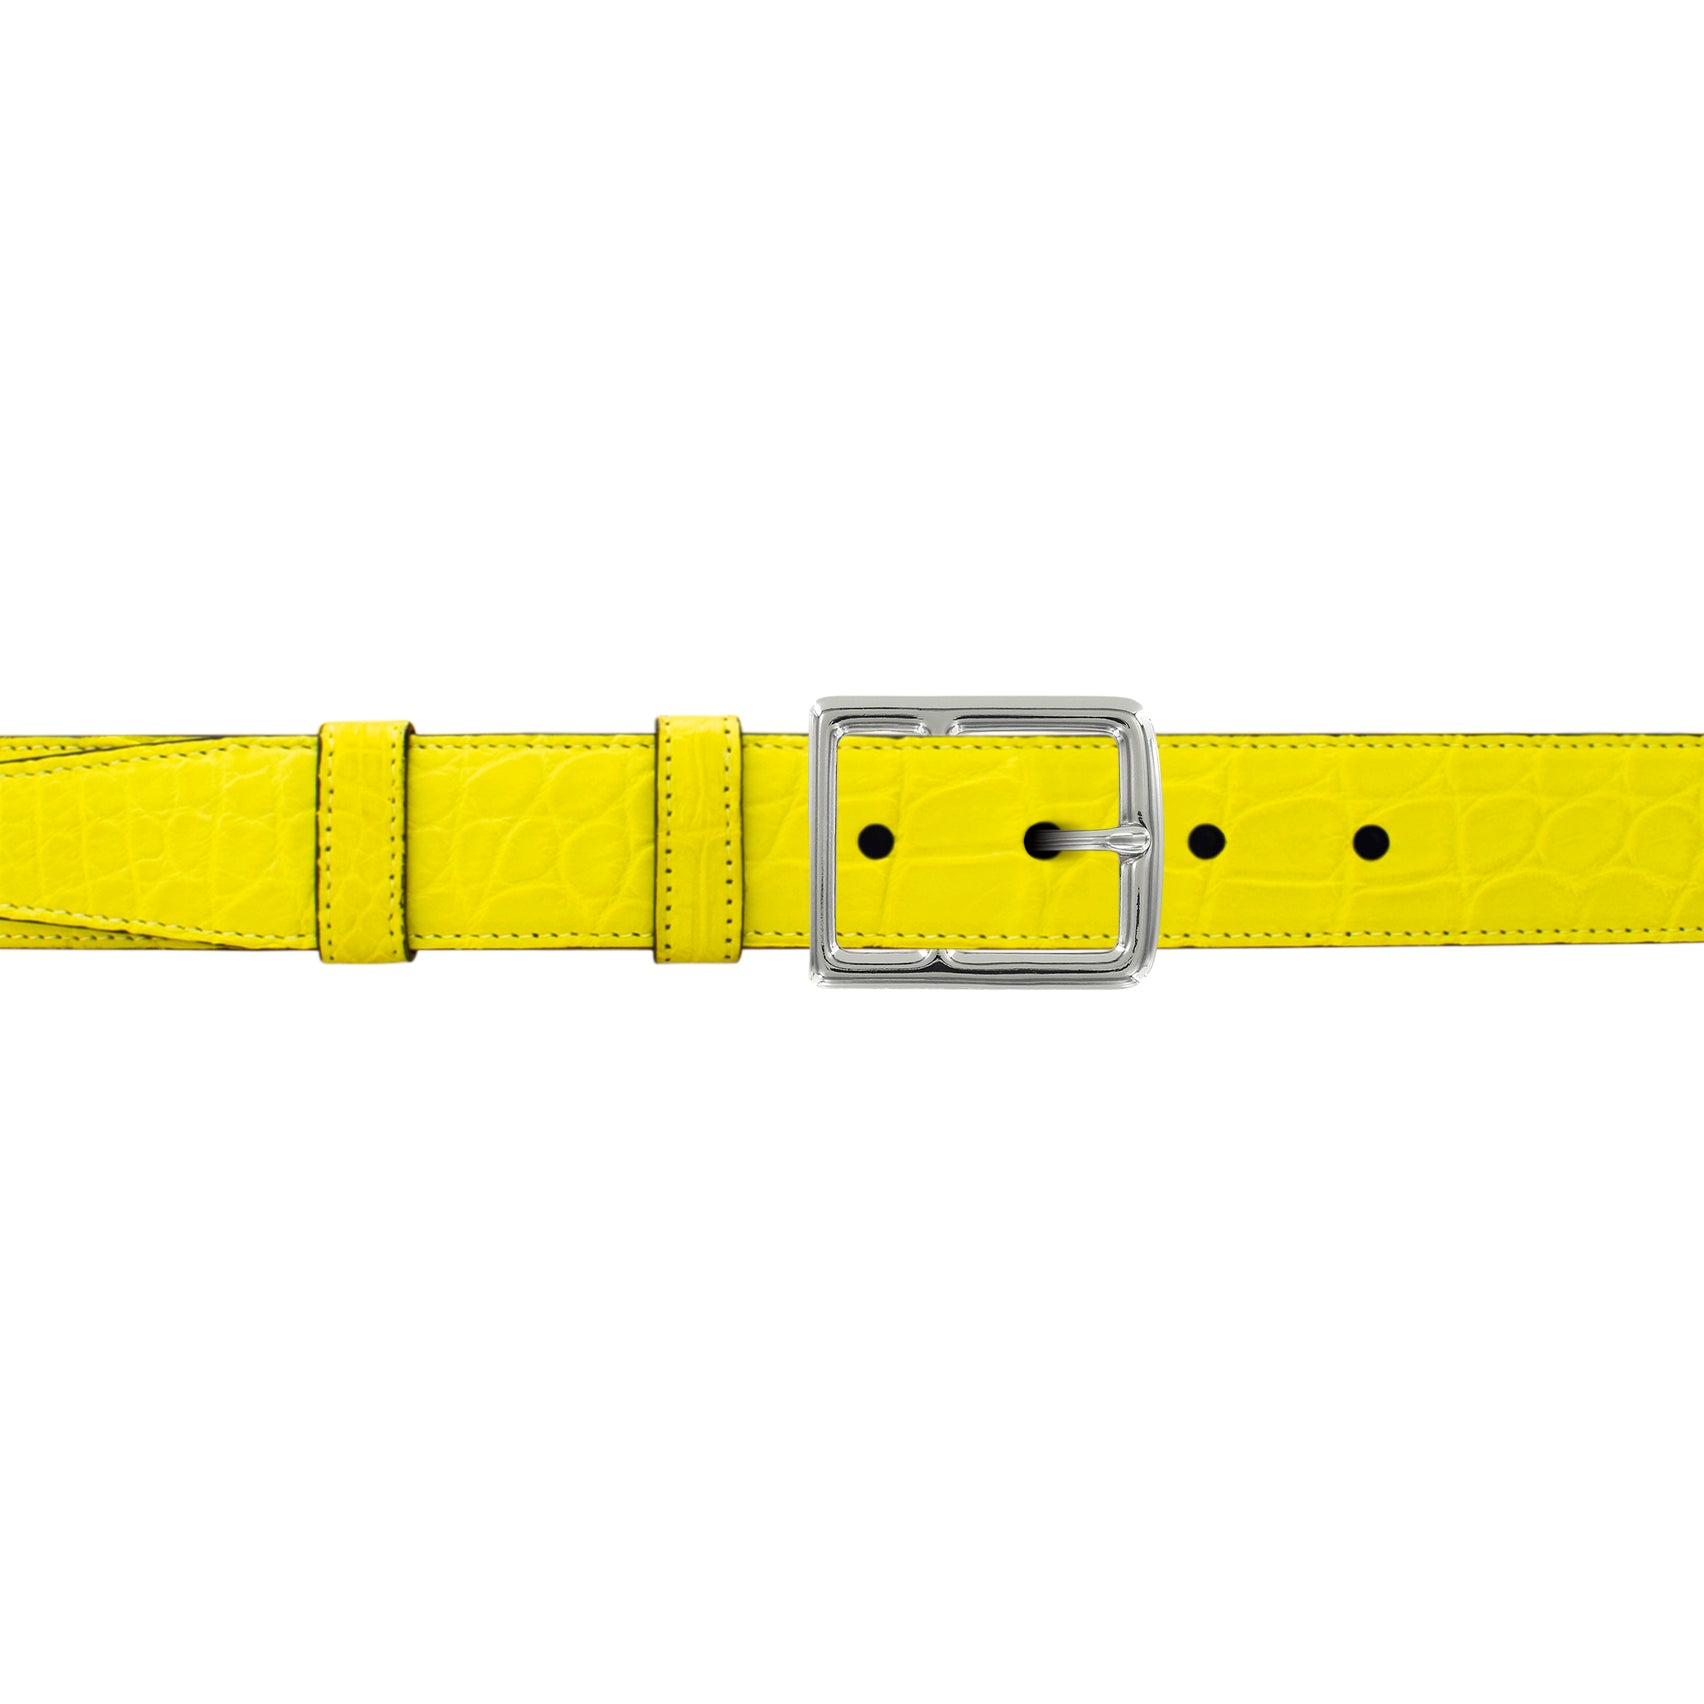 1" Canary Seasonal Belt with Crawford Casual Buckle in Polished Nickel